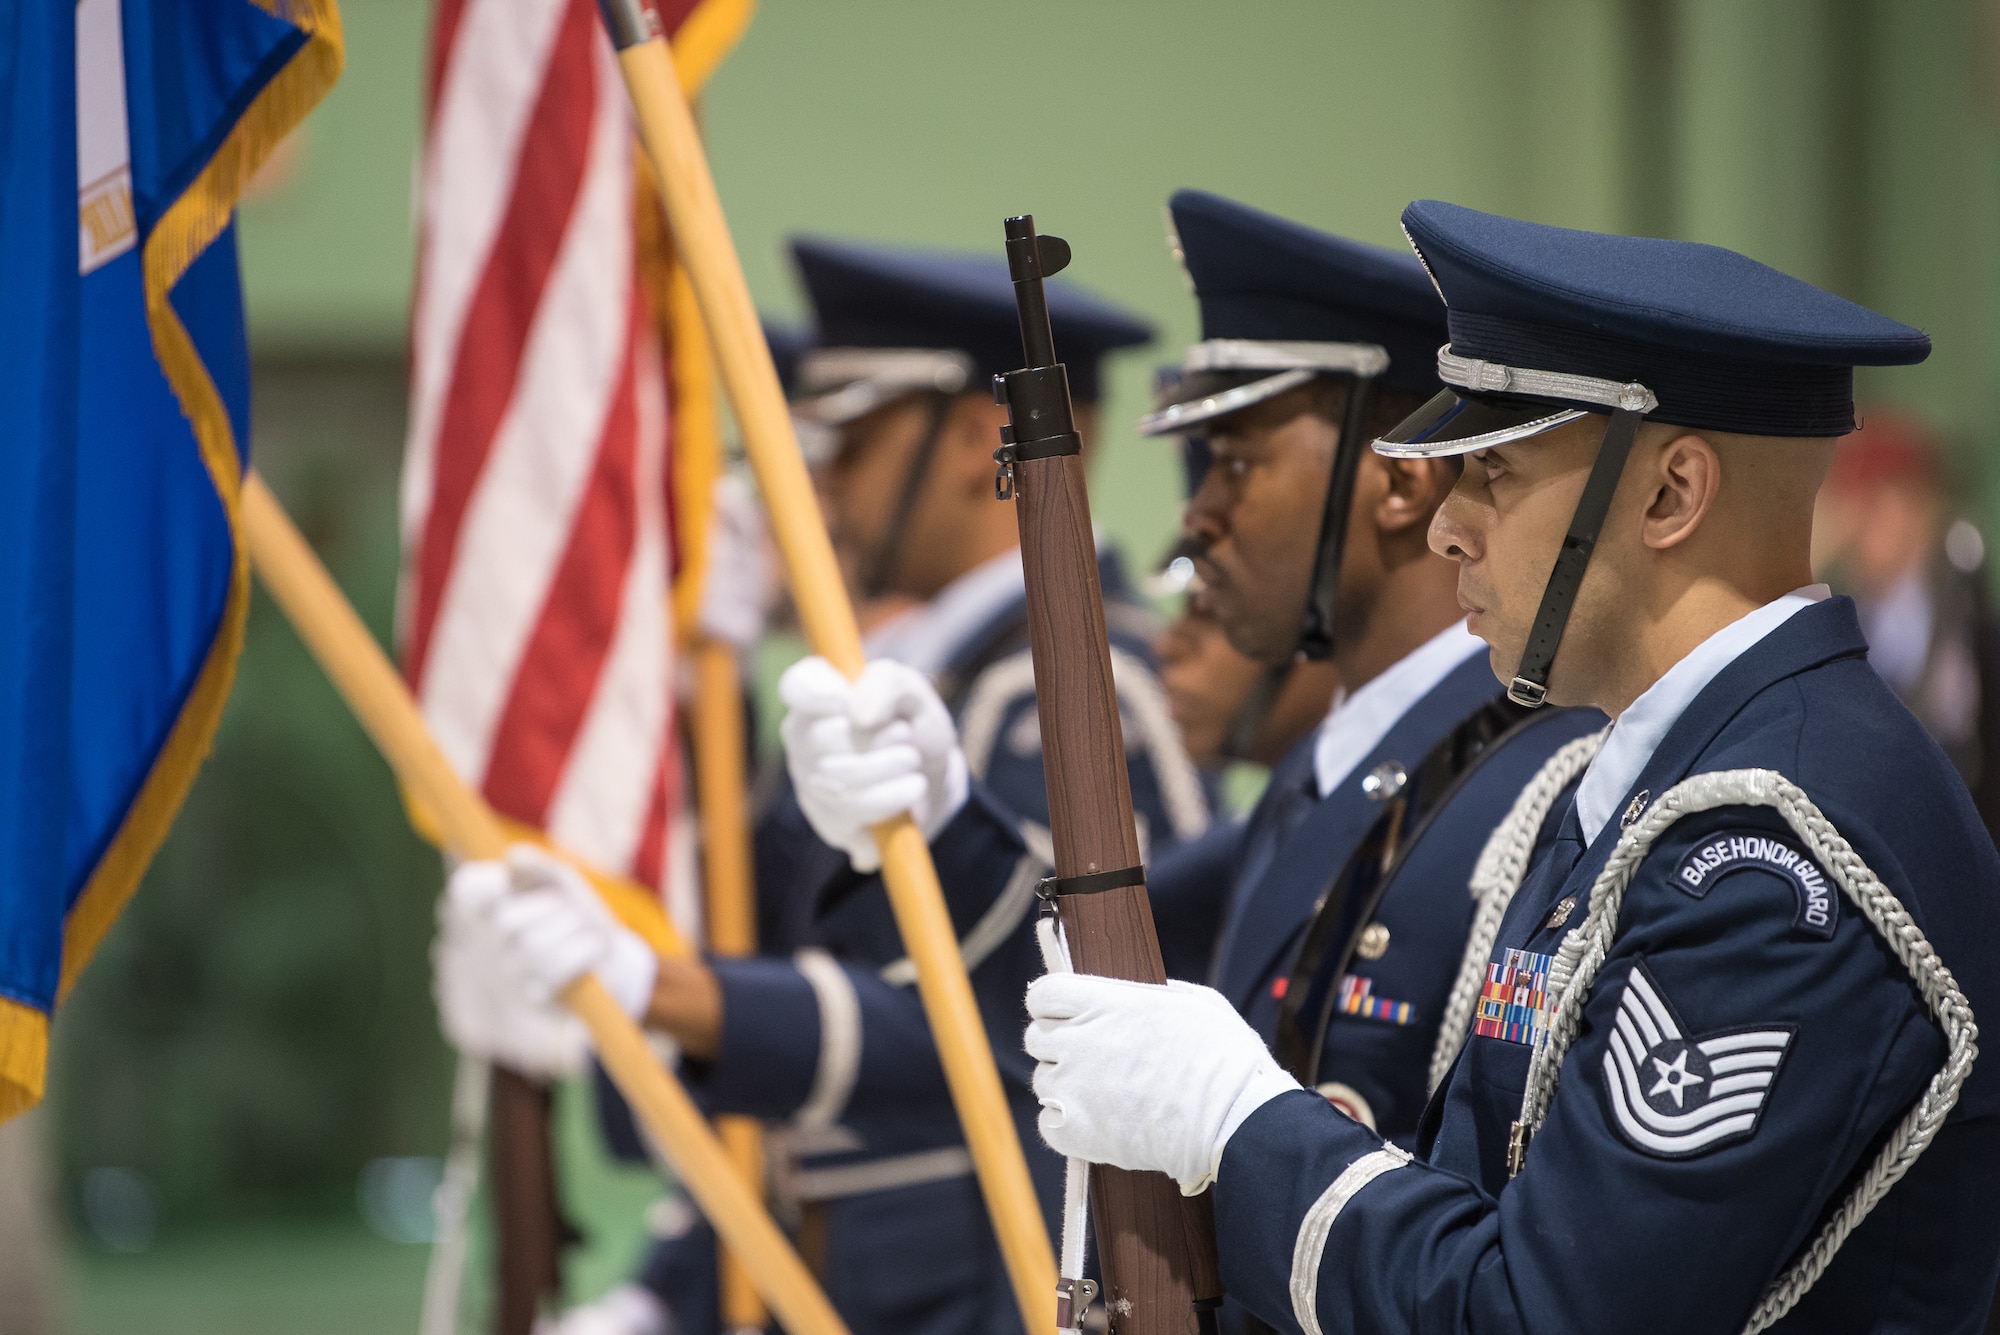 The 123rd Airlift Wing Honor Guard presents the colors during a ceremony at the Kentucky Air National Guard Base in Louisville, Ky, Aug.13, 2019, to bestow the Air Force Cross on Tech. Sgt. Daniel Keller, a combat controller in the 123rd Special Tactics Squadron. Keller earned the medal for valor on the battlefield in Afghanistan. (U.S. Air National Guard photo by Staff Sgt. Joshua Horton)